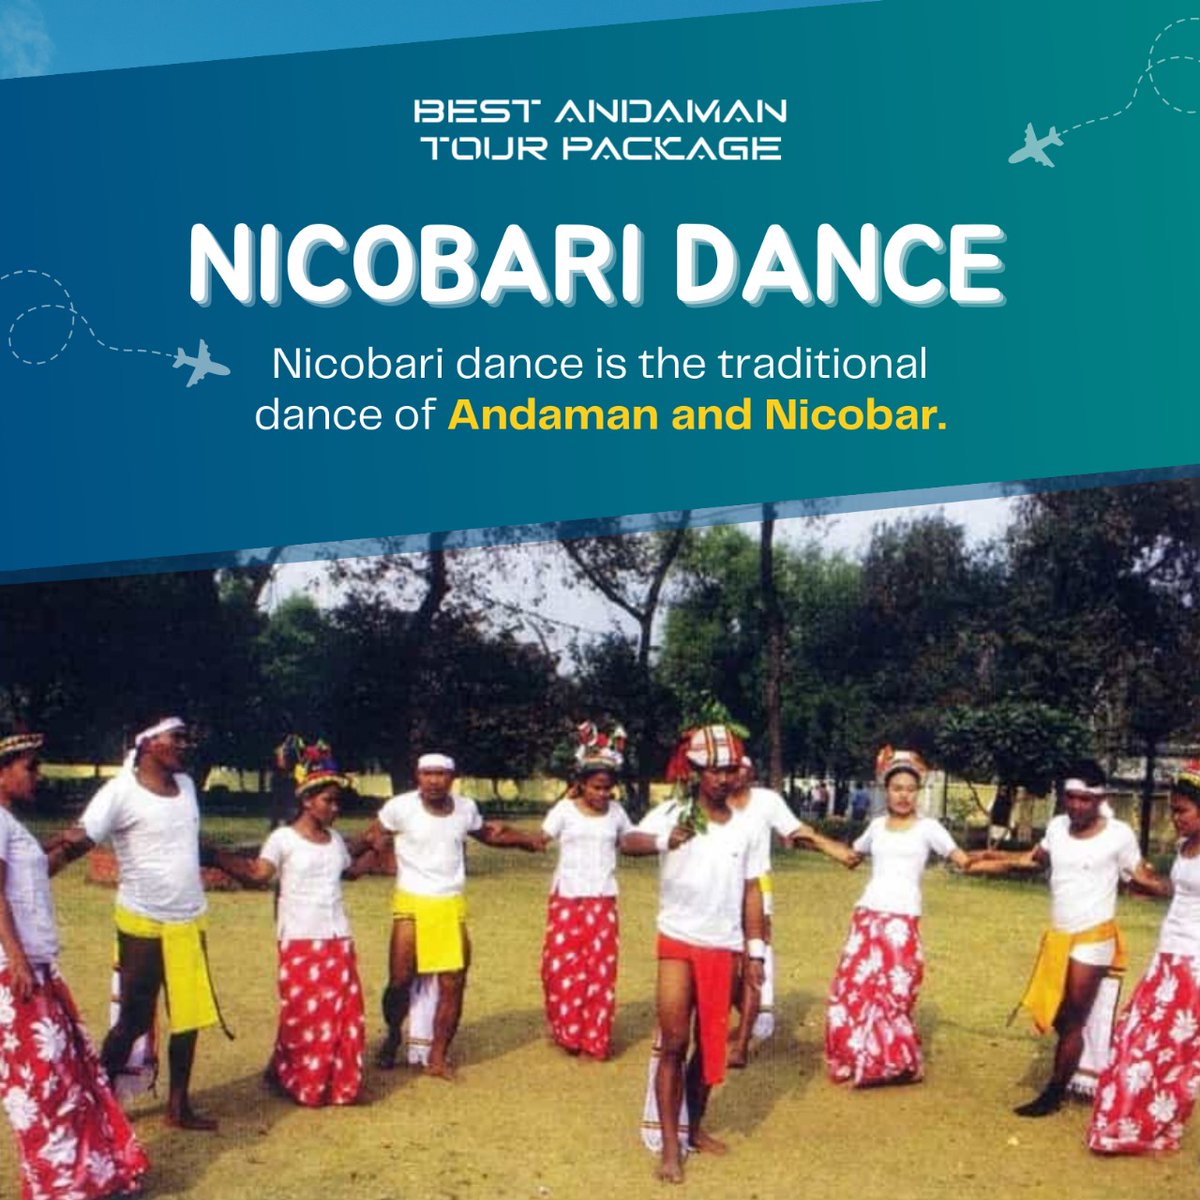 Get ready to groove with the vibrant Nicobari dance! 💃🥁 Let the rhythm of colorful attire and lively music sweep you off your feet! 🌴🎶 From mimicking fishing to celebrating harvests, it's all about fun and connection to nature.

#NicobariDance #IslandRhythms #DanceToTheBeat